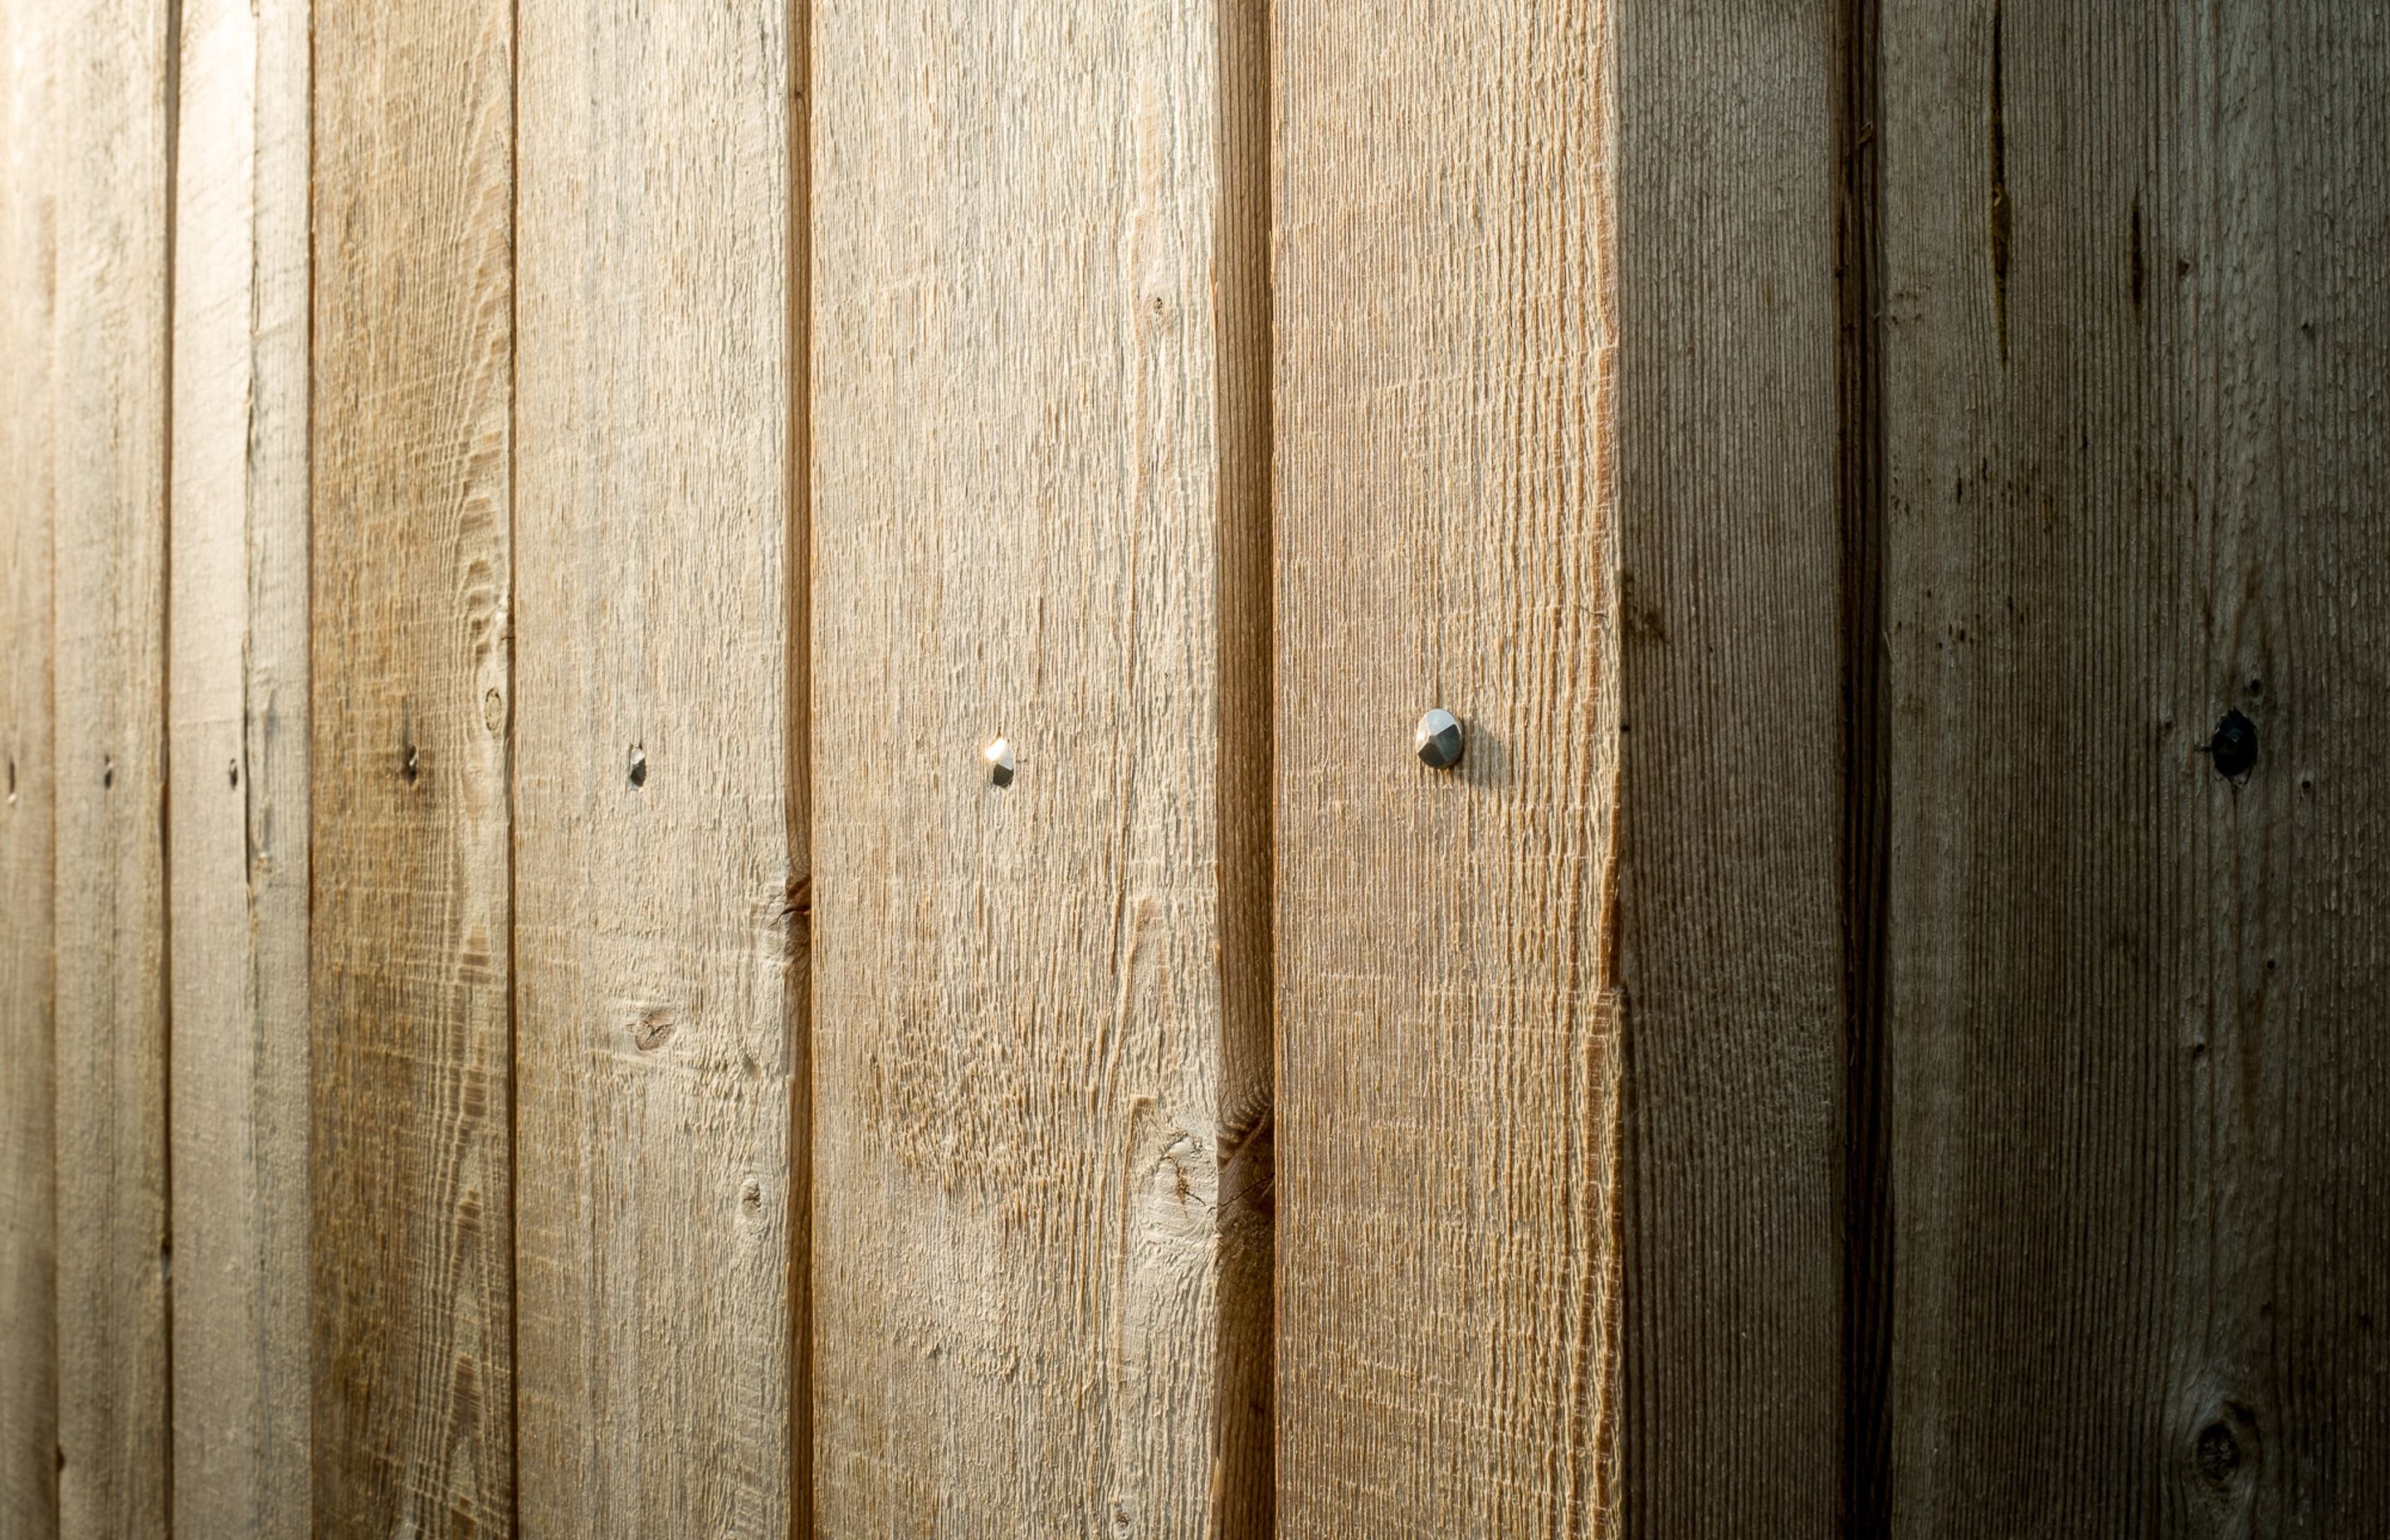 Siberian Larch cladding is fixed with battered nails, in reference to the rural shed aesthetic.